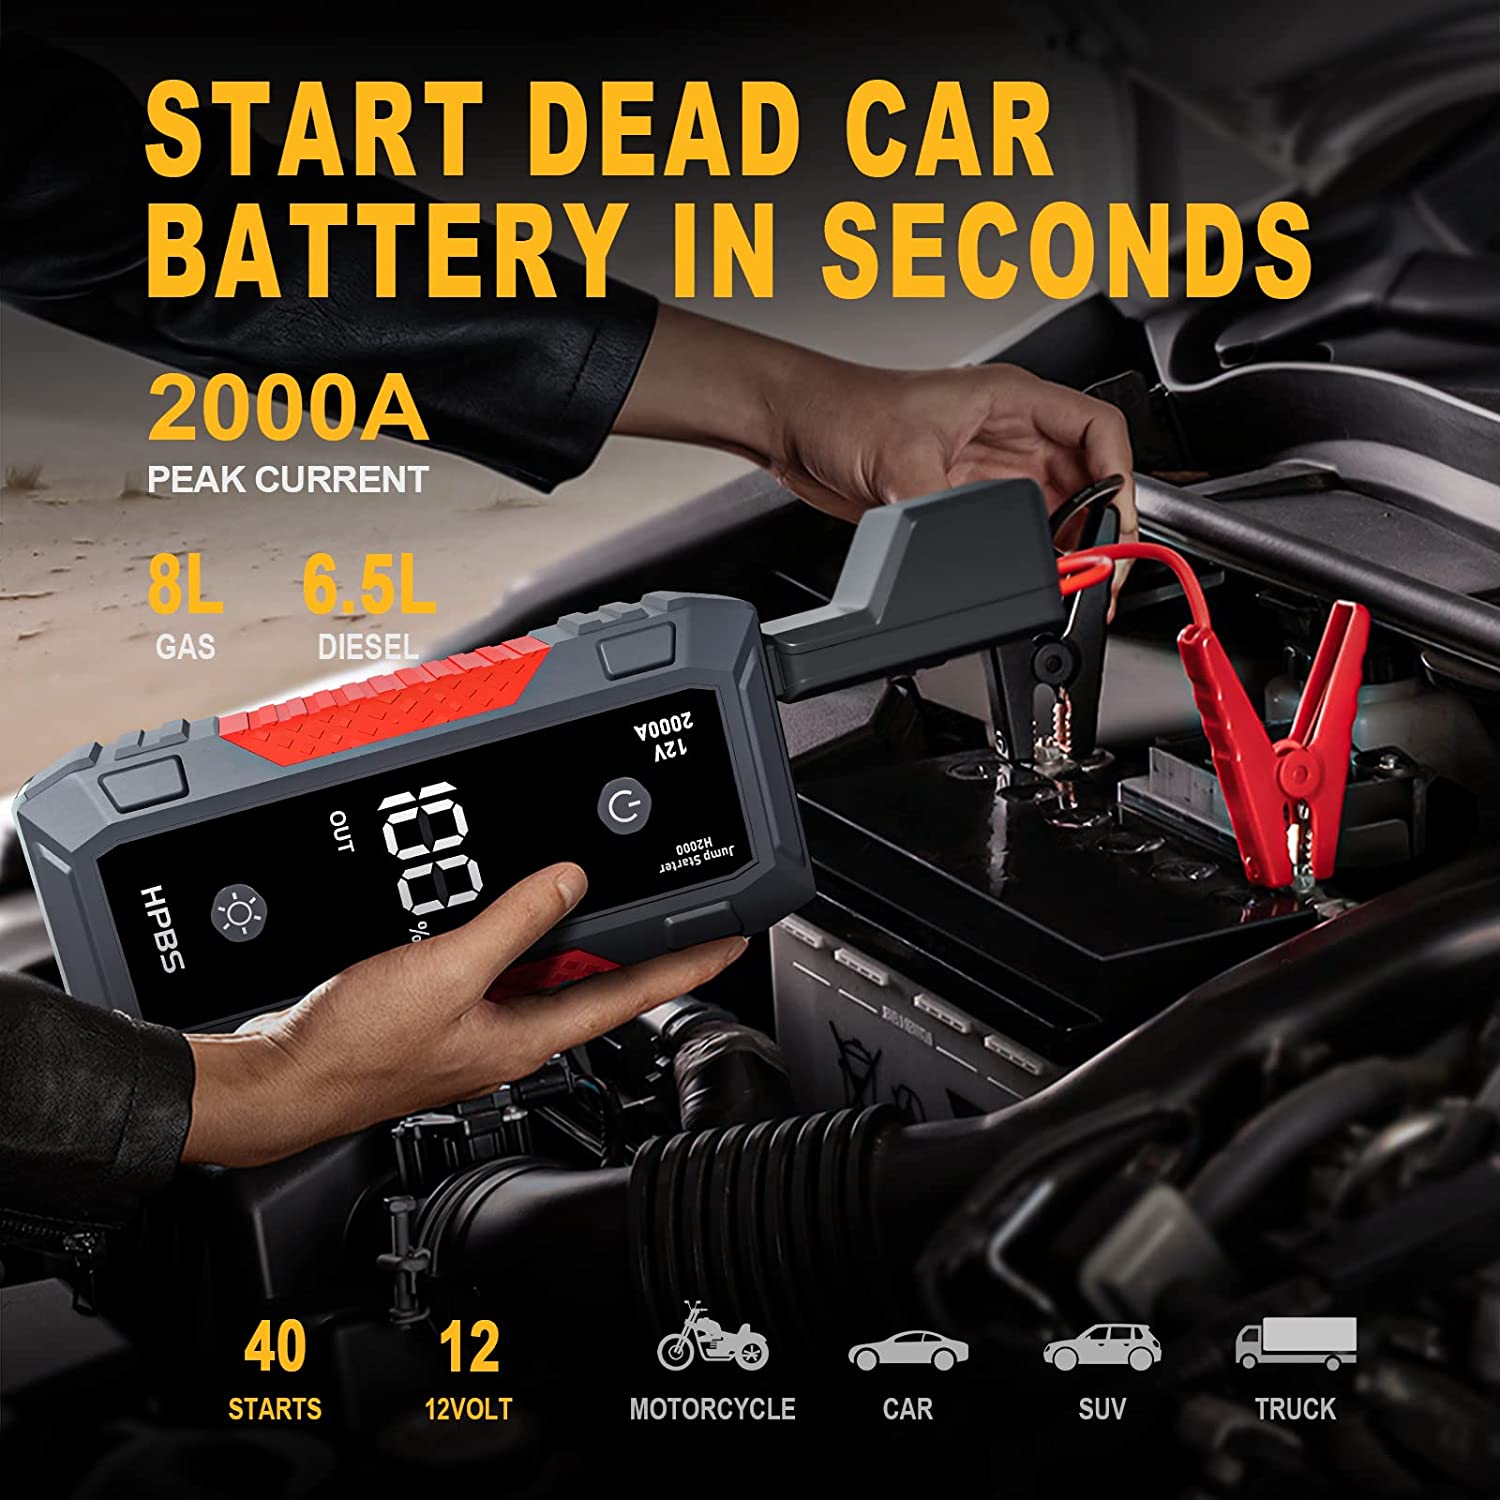 https://bigbigmart.com/wp-content/uploads/2023/06/HPBS-Jump-Starter-2000A-Jump-Starter-Battery-Pack-for-Up-to-8L-Gas-and-6.5L-Diesel-Engines-12V-Portable-Car-Battery-Jump-Starter-Box-with-3.0-LCD-Display-Red1.jpg